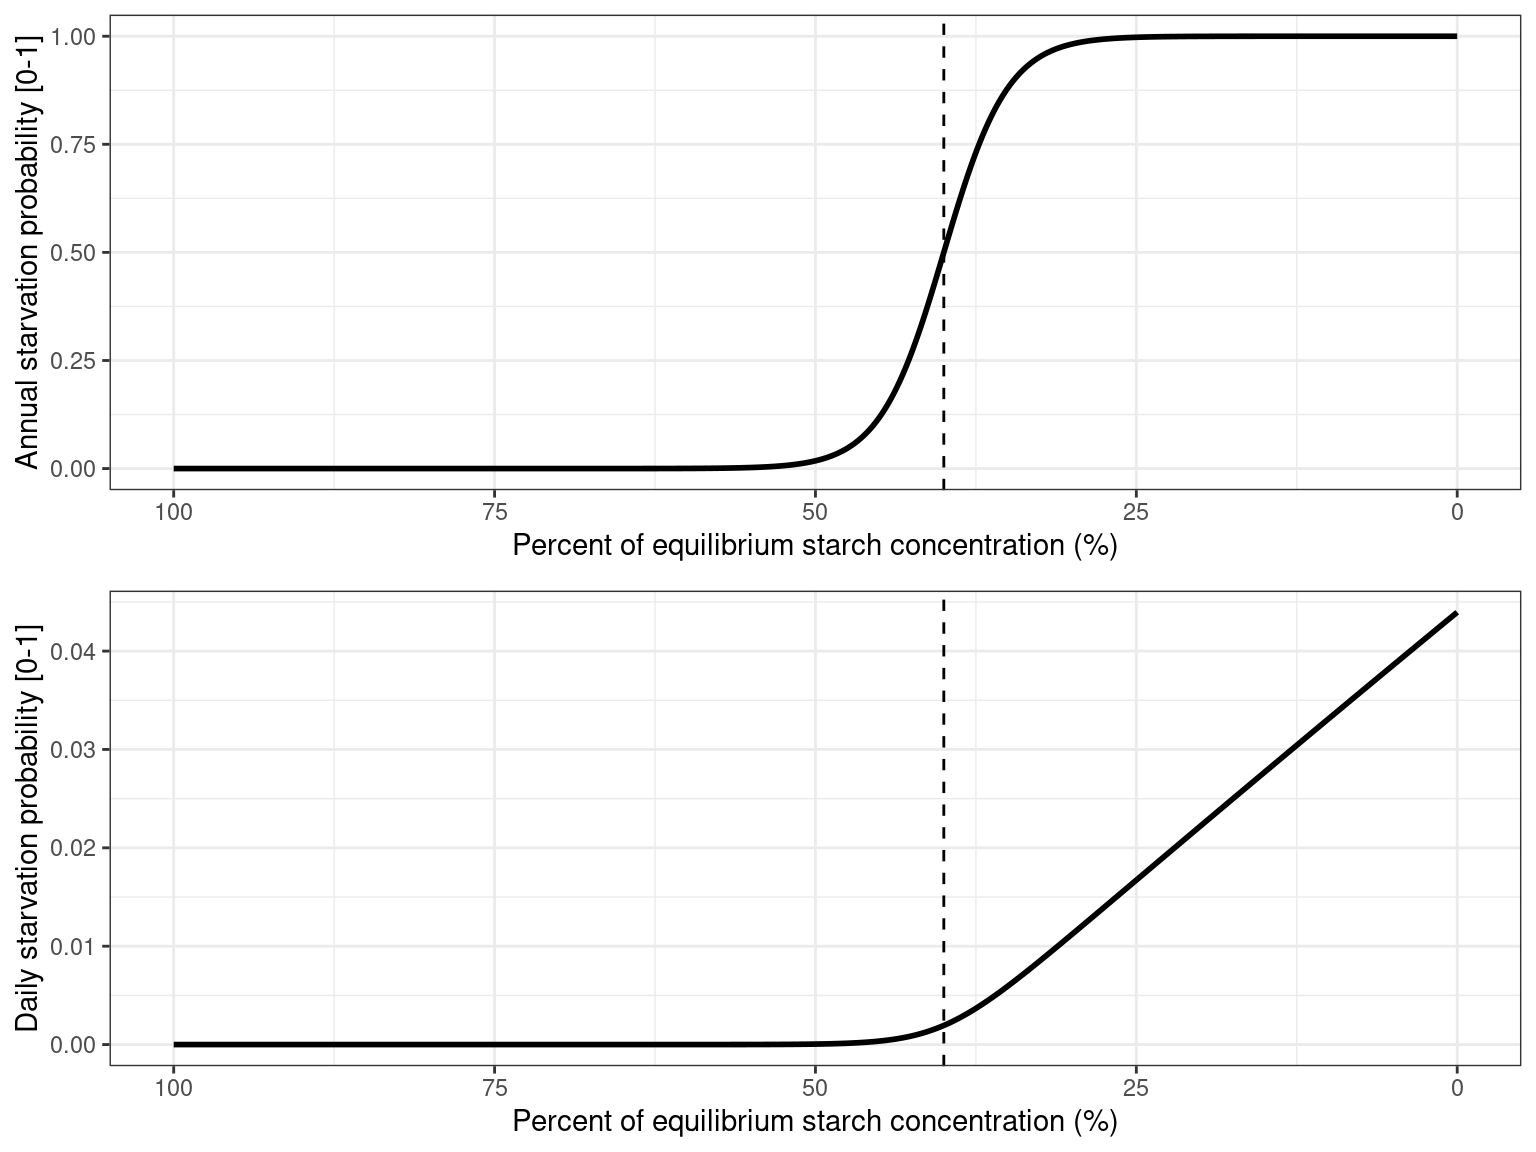 Annual (top) and daily (bottom) probability of starvation as a function of sapwood starch concentration relative to its equilibrium value.